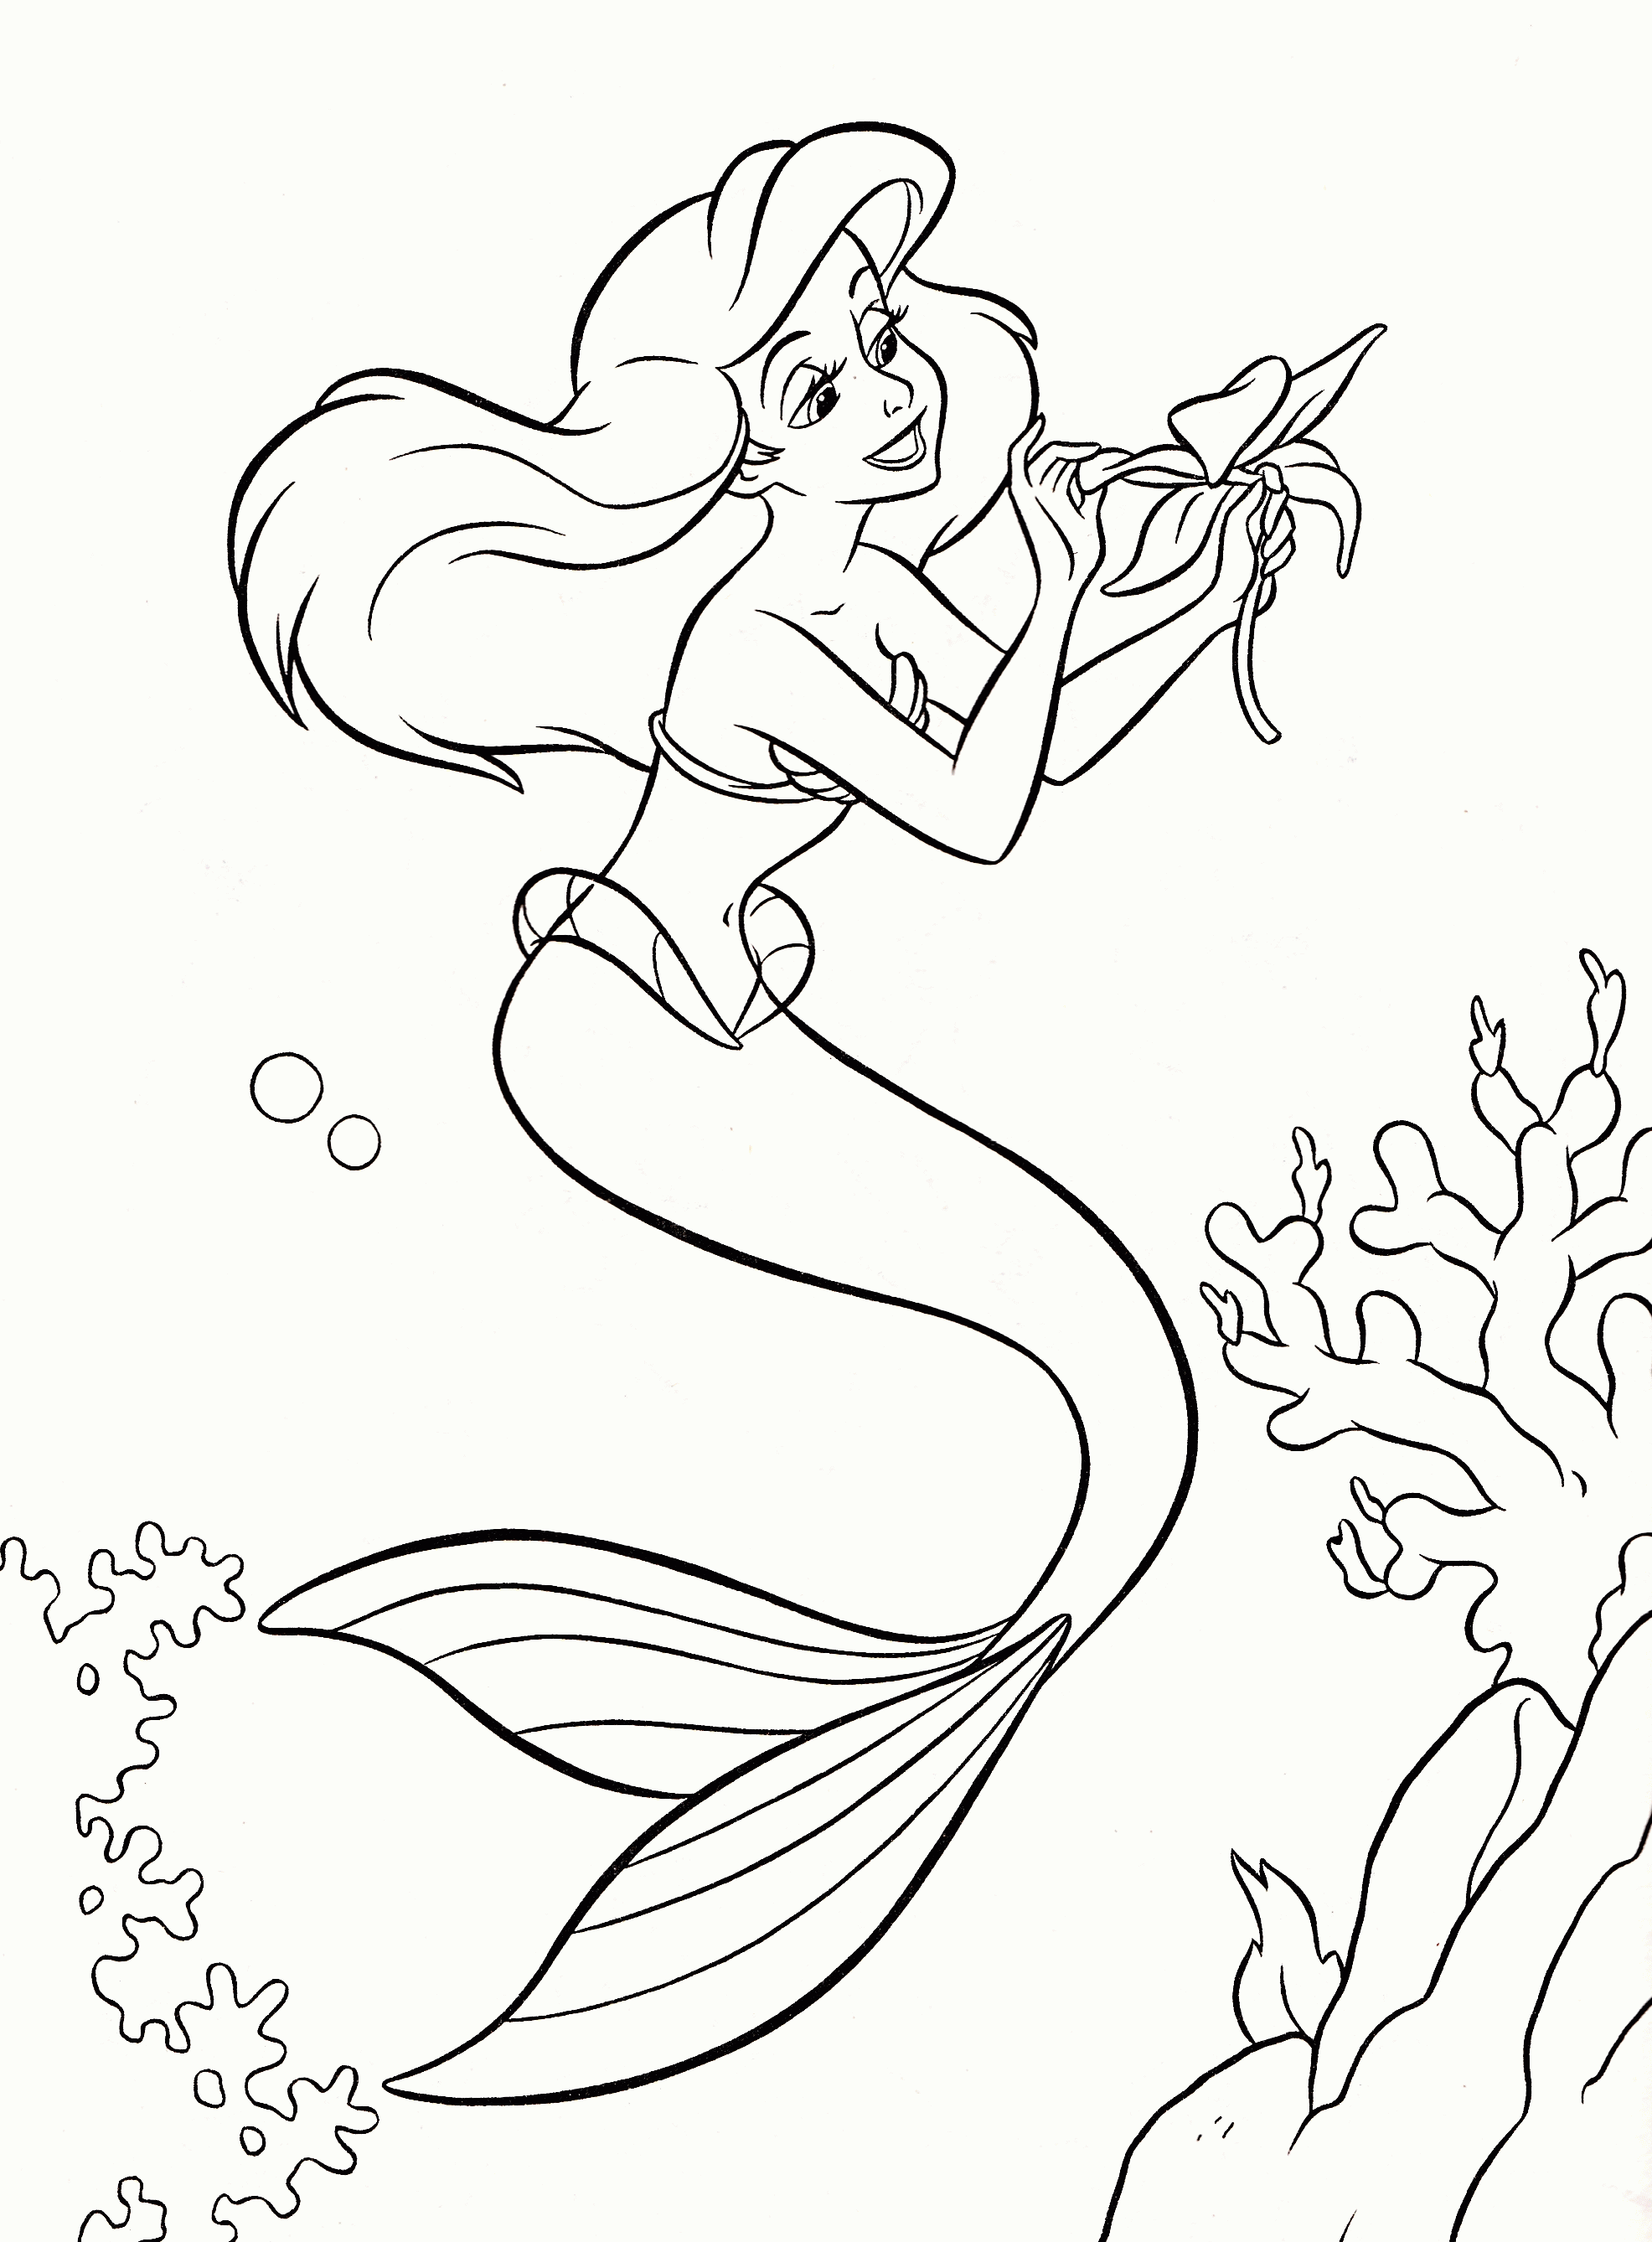 Coloring Pages Of Princesses In Disney - Coloring Page Photos